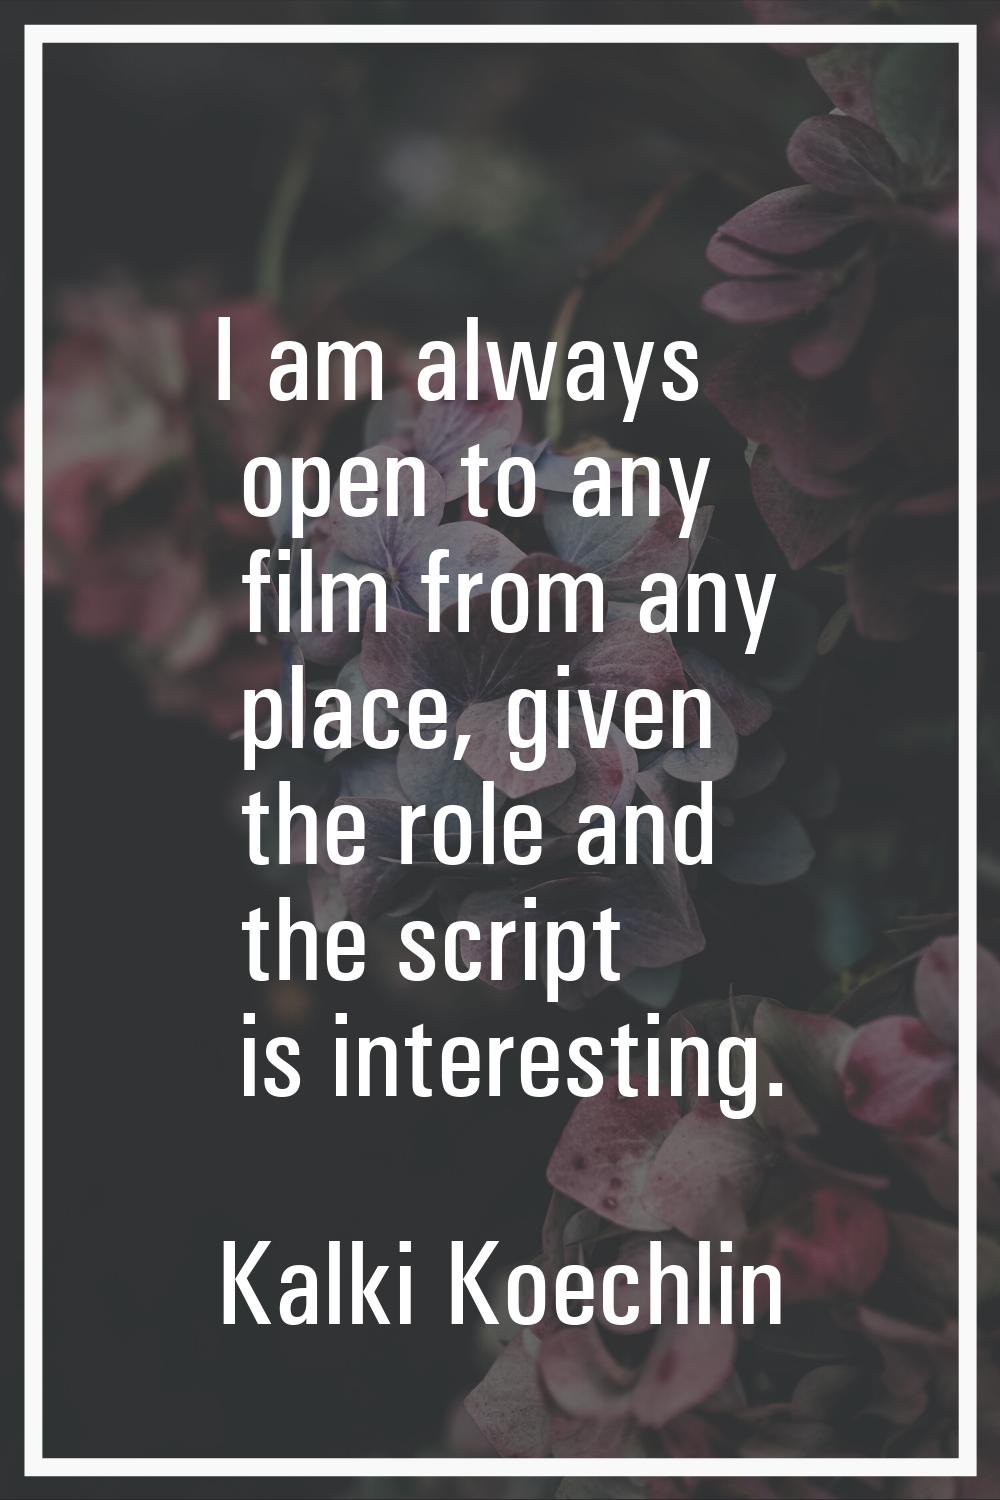 I am always open to any film from any place, given the role and the script is interesting.